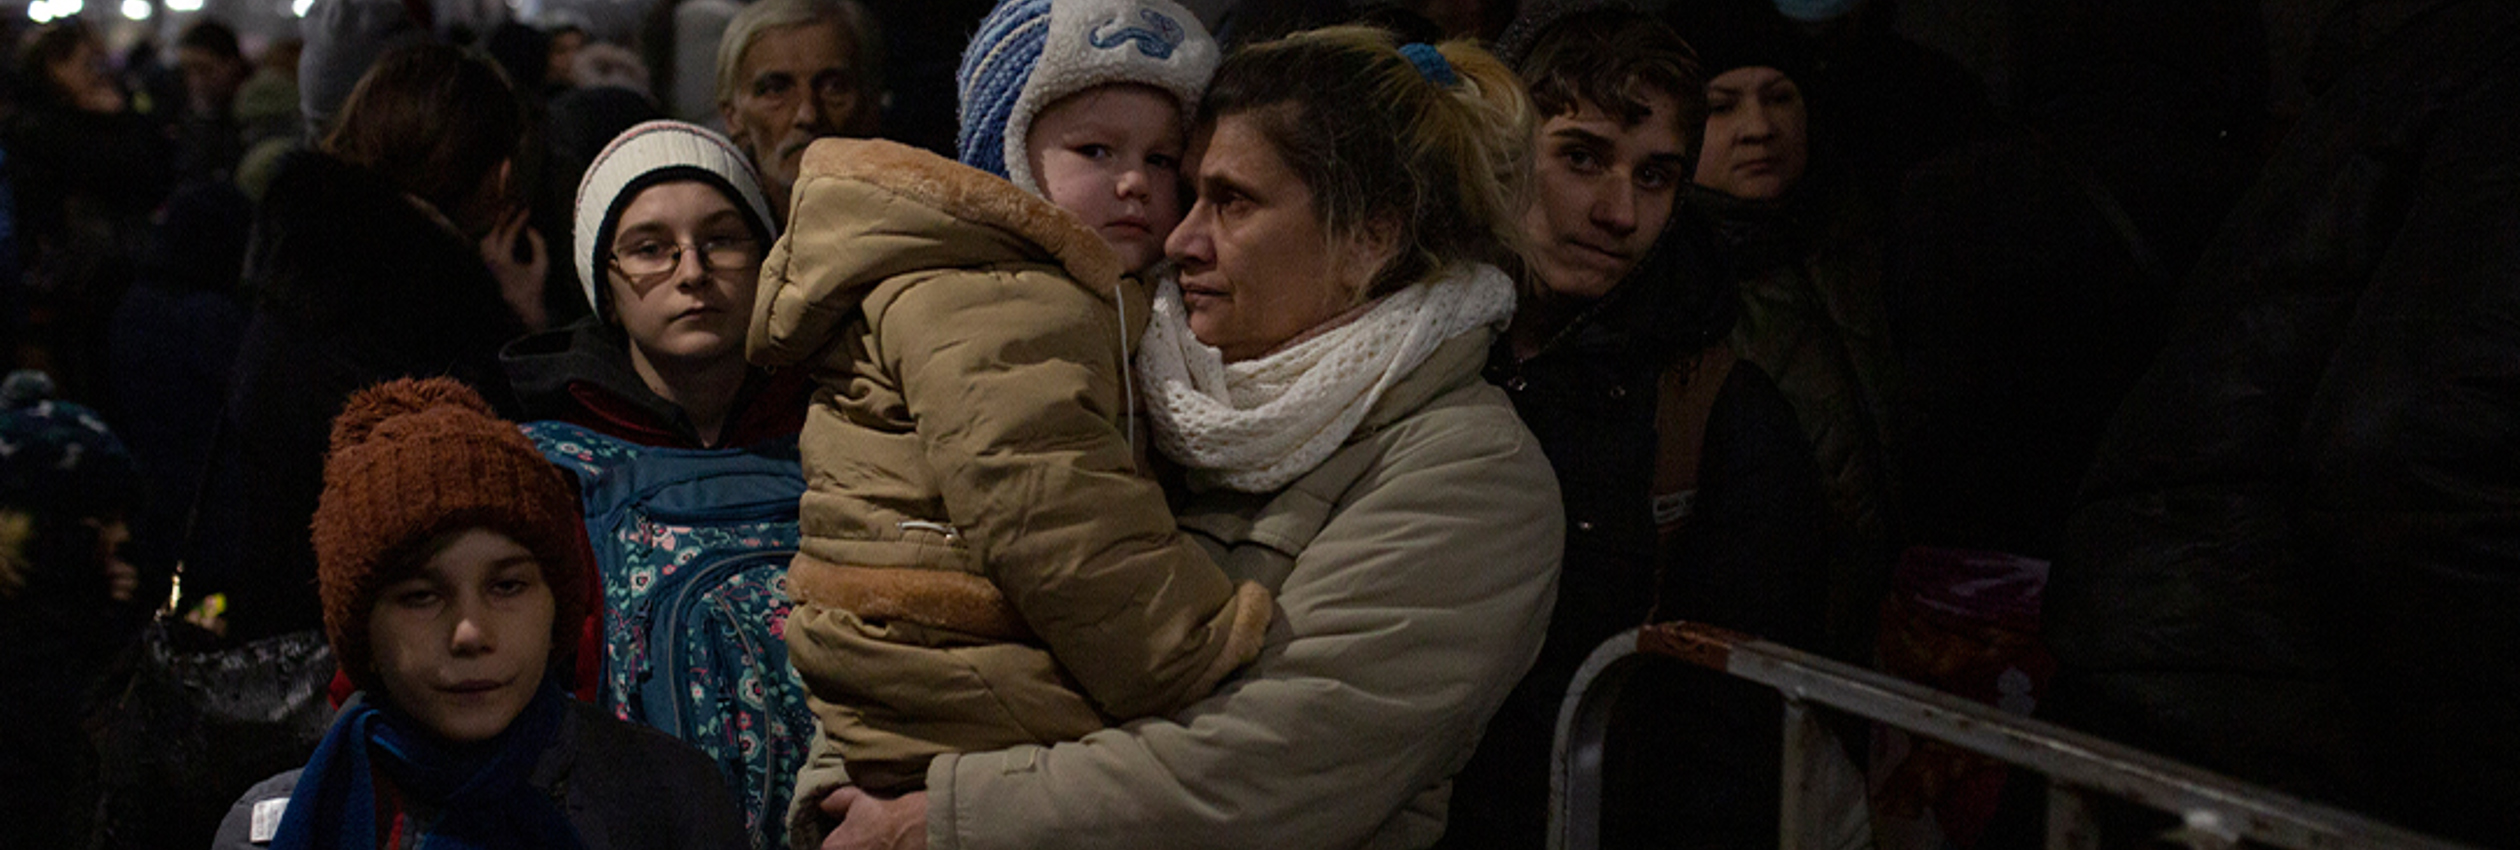 Mother holds baby © UNHCR / Valerio Muscella